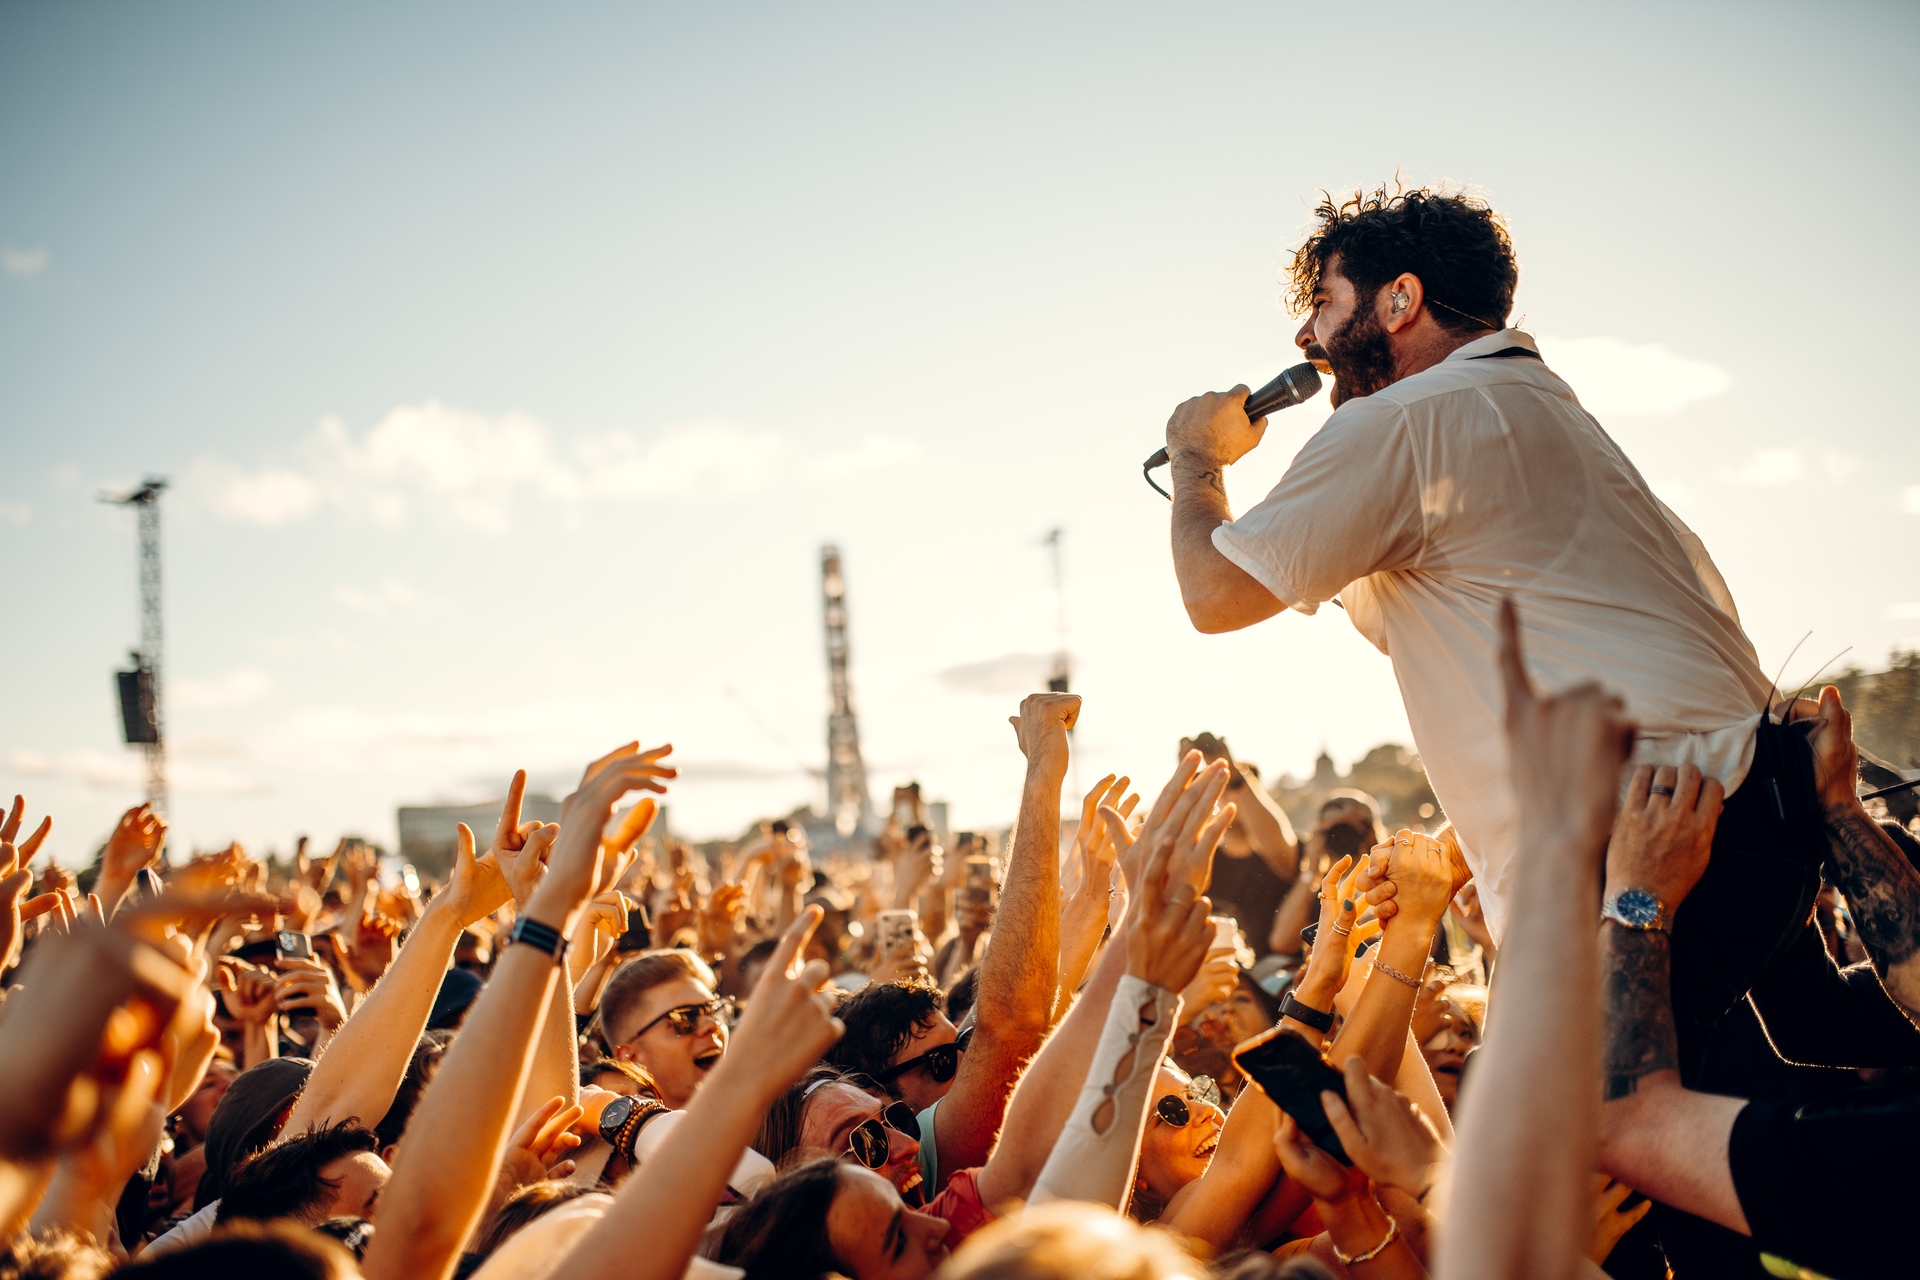 Foals frontman Yannis Philippakis got up close with the crowd in Glasgow Green. (Image: TRNSMT)